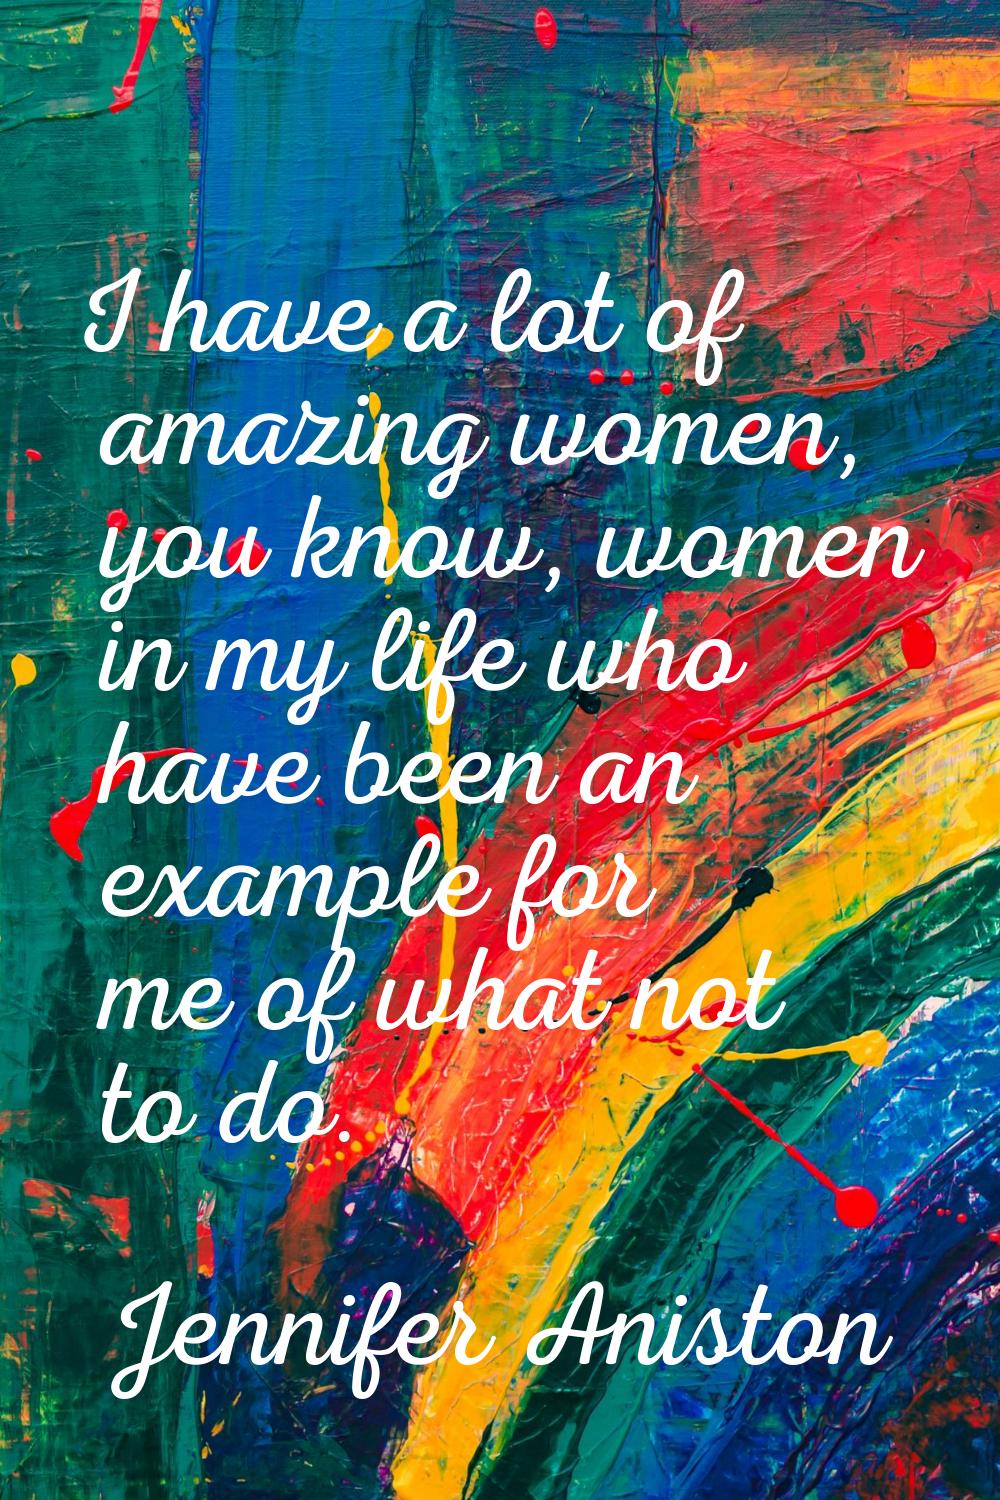 I have a lot of amazing women, you know, women in my life who have been an example for me of what n